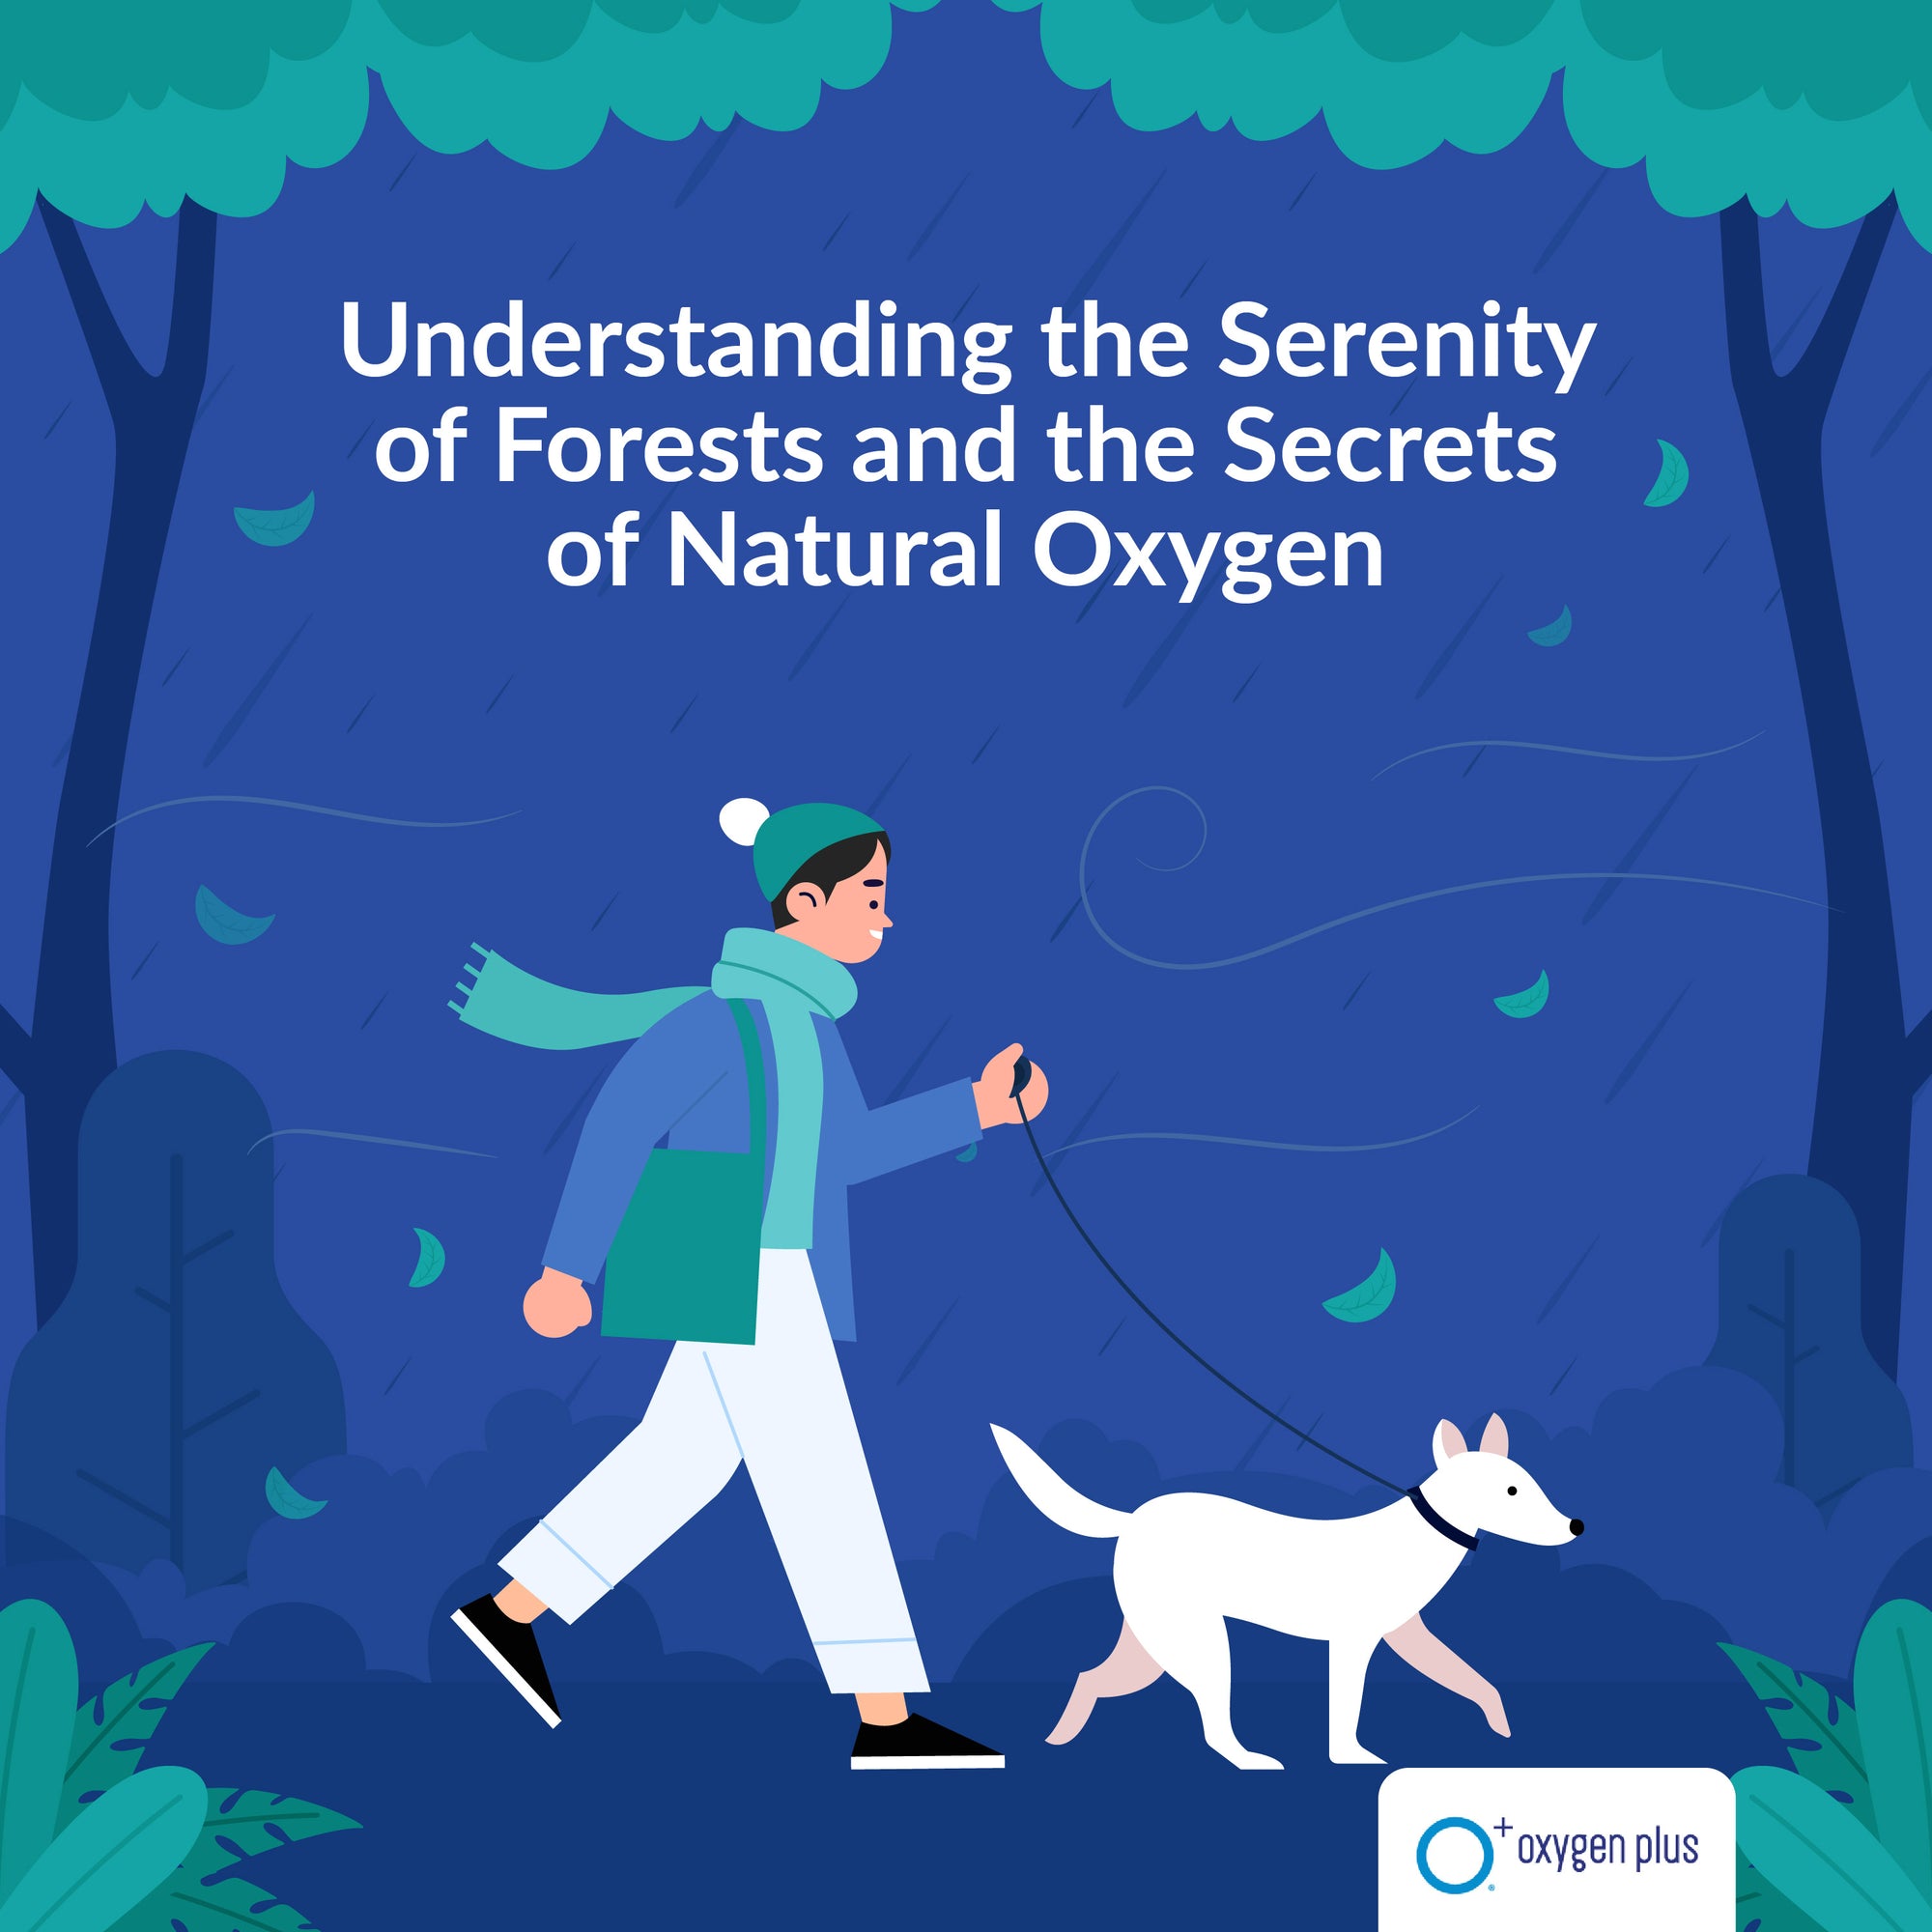 Understanding the serenity of forests and the secrets of natural oxygen